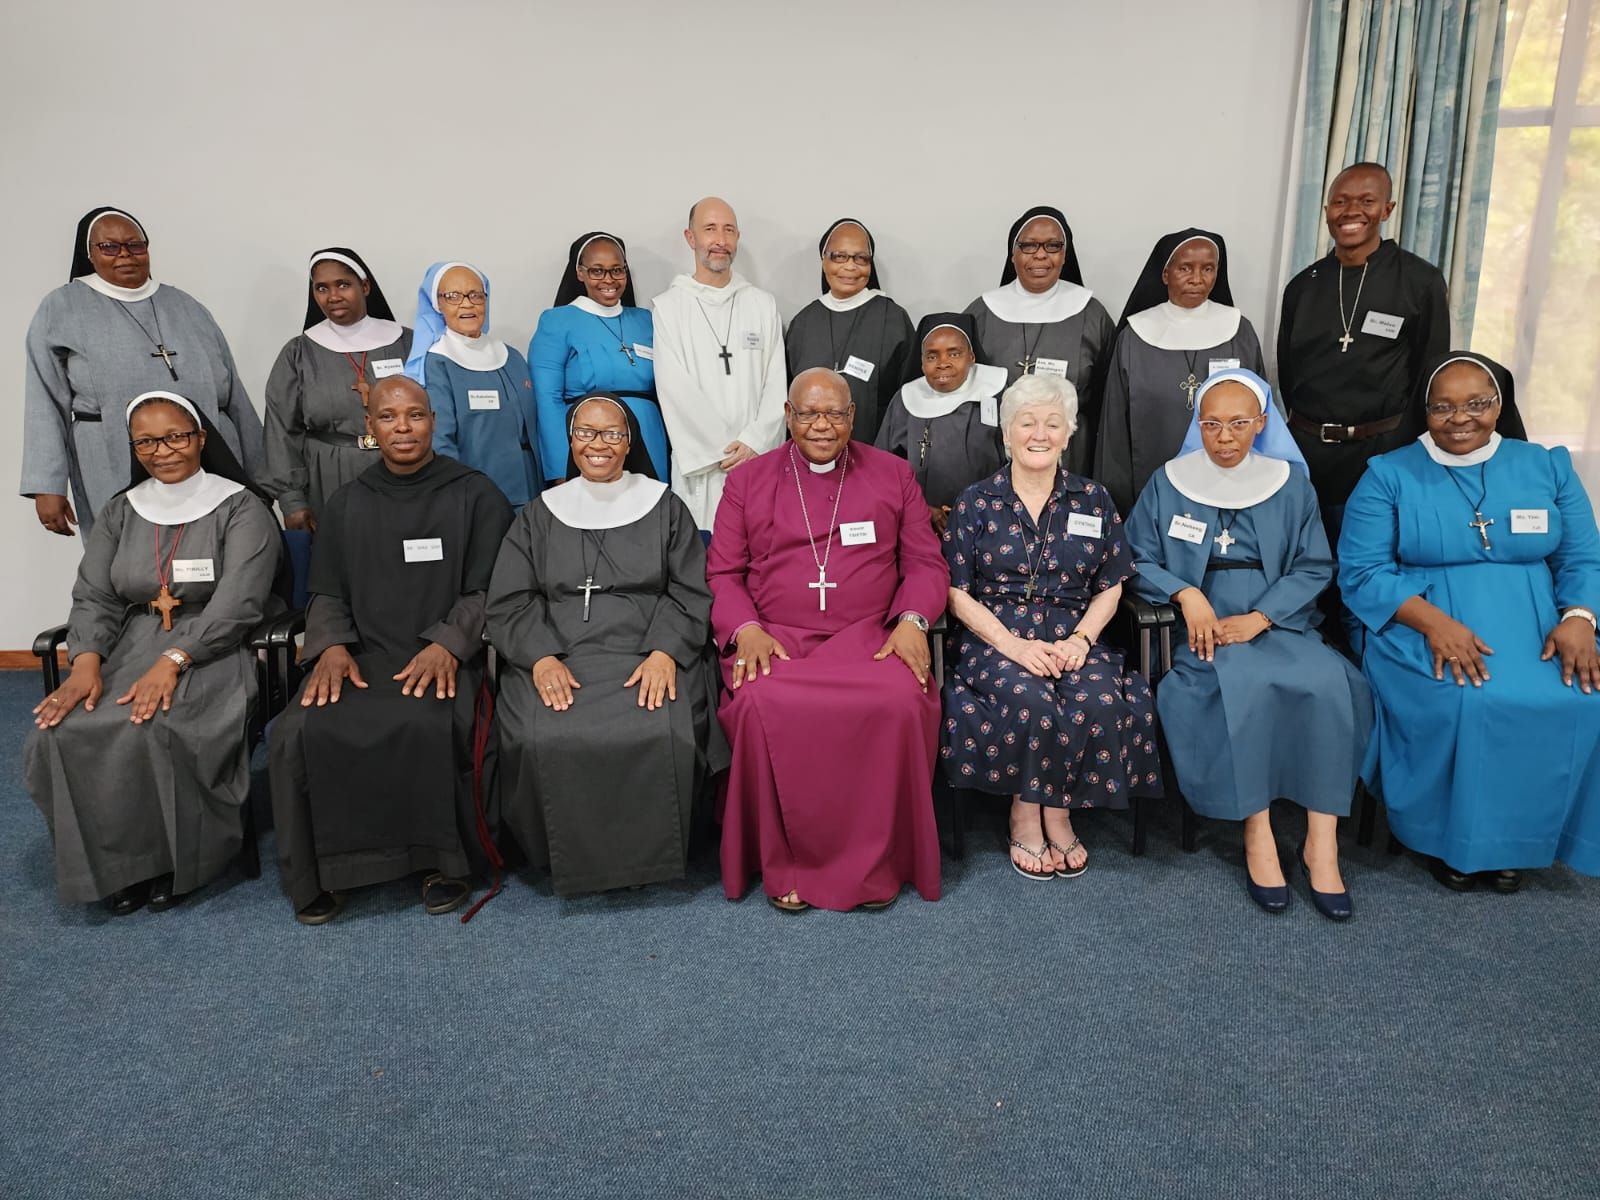 council for the religious life